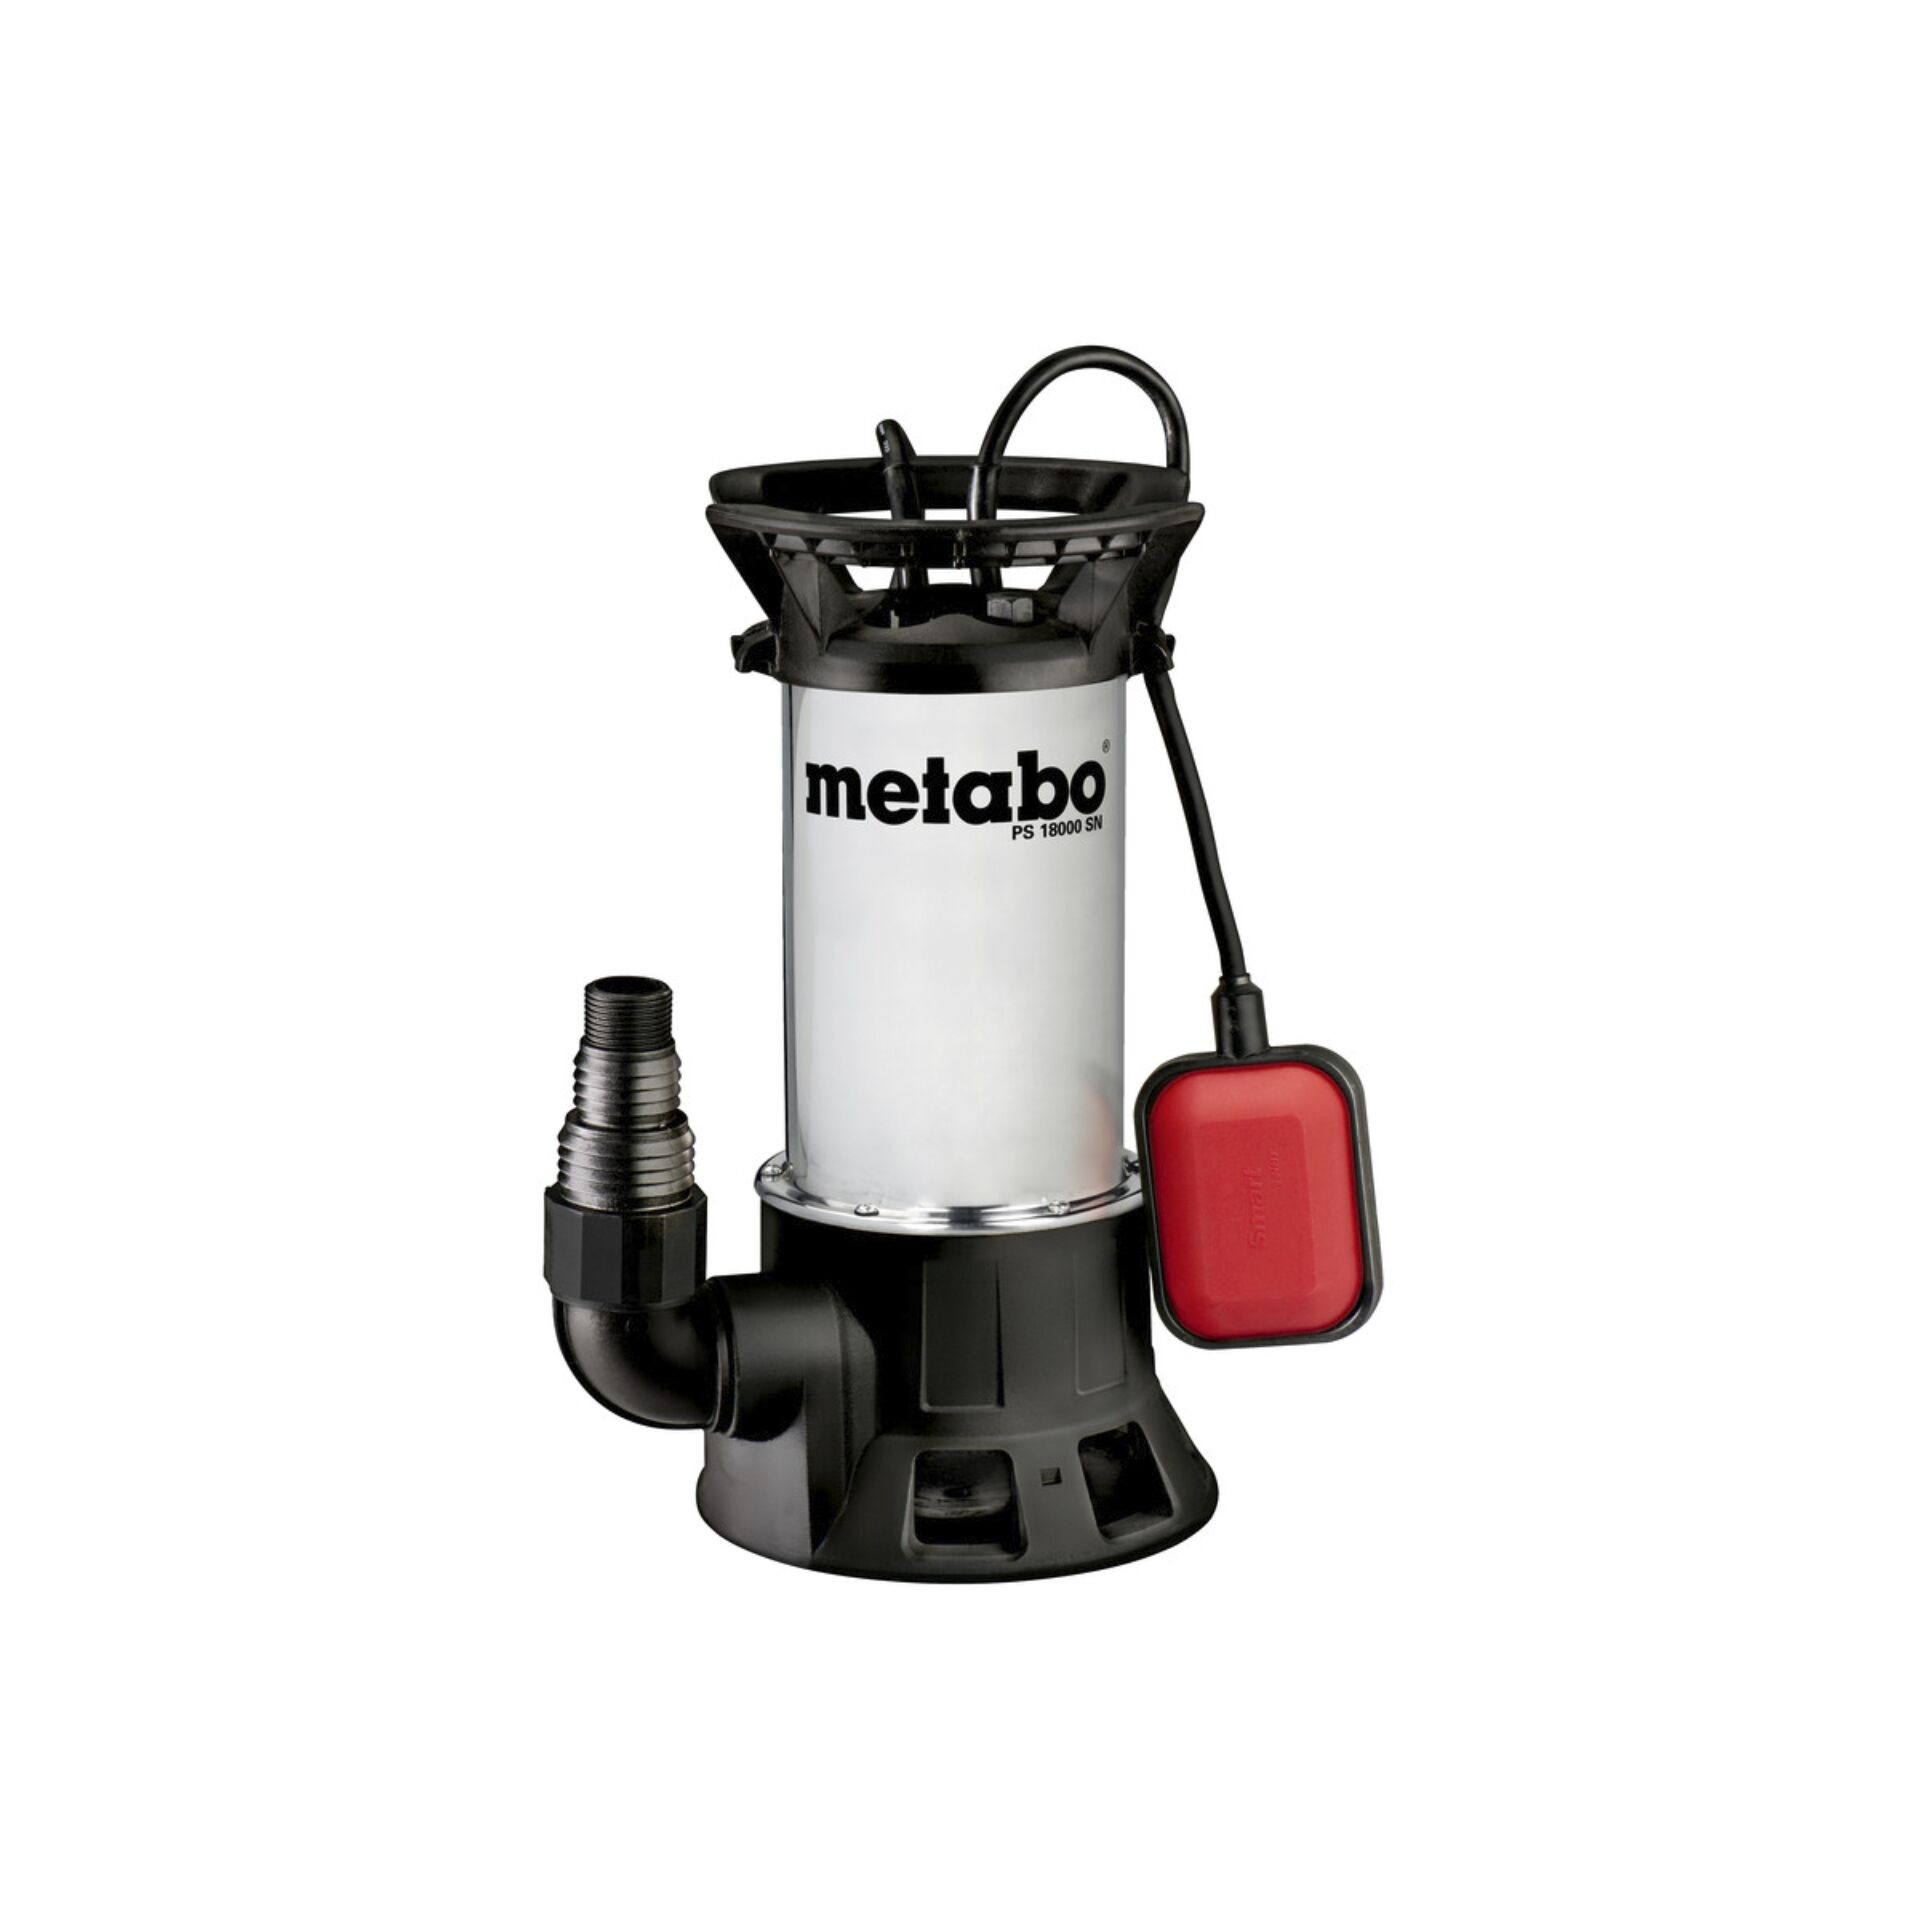 Metabo PS 18000 SN Submersible Dirty Water Pump